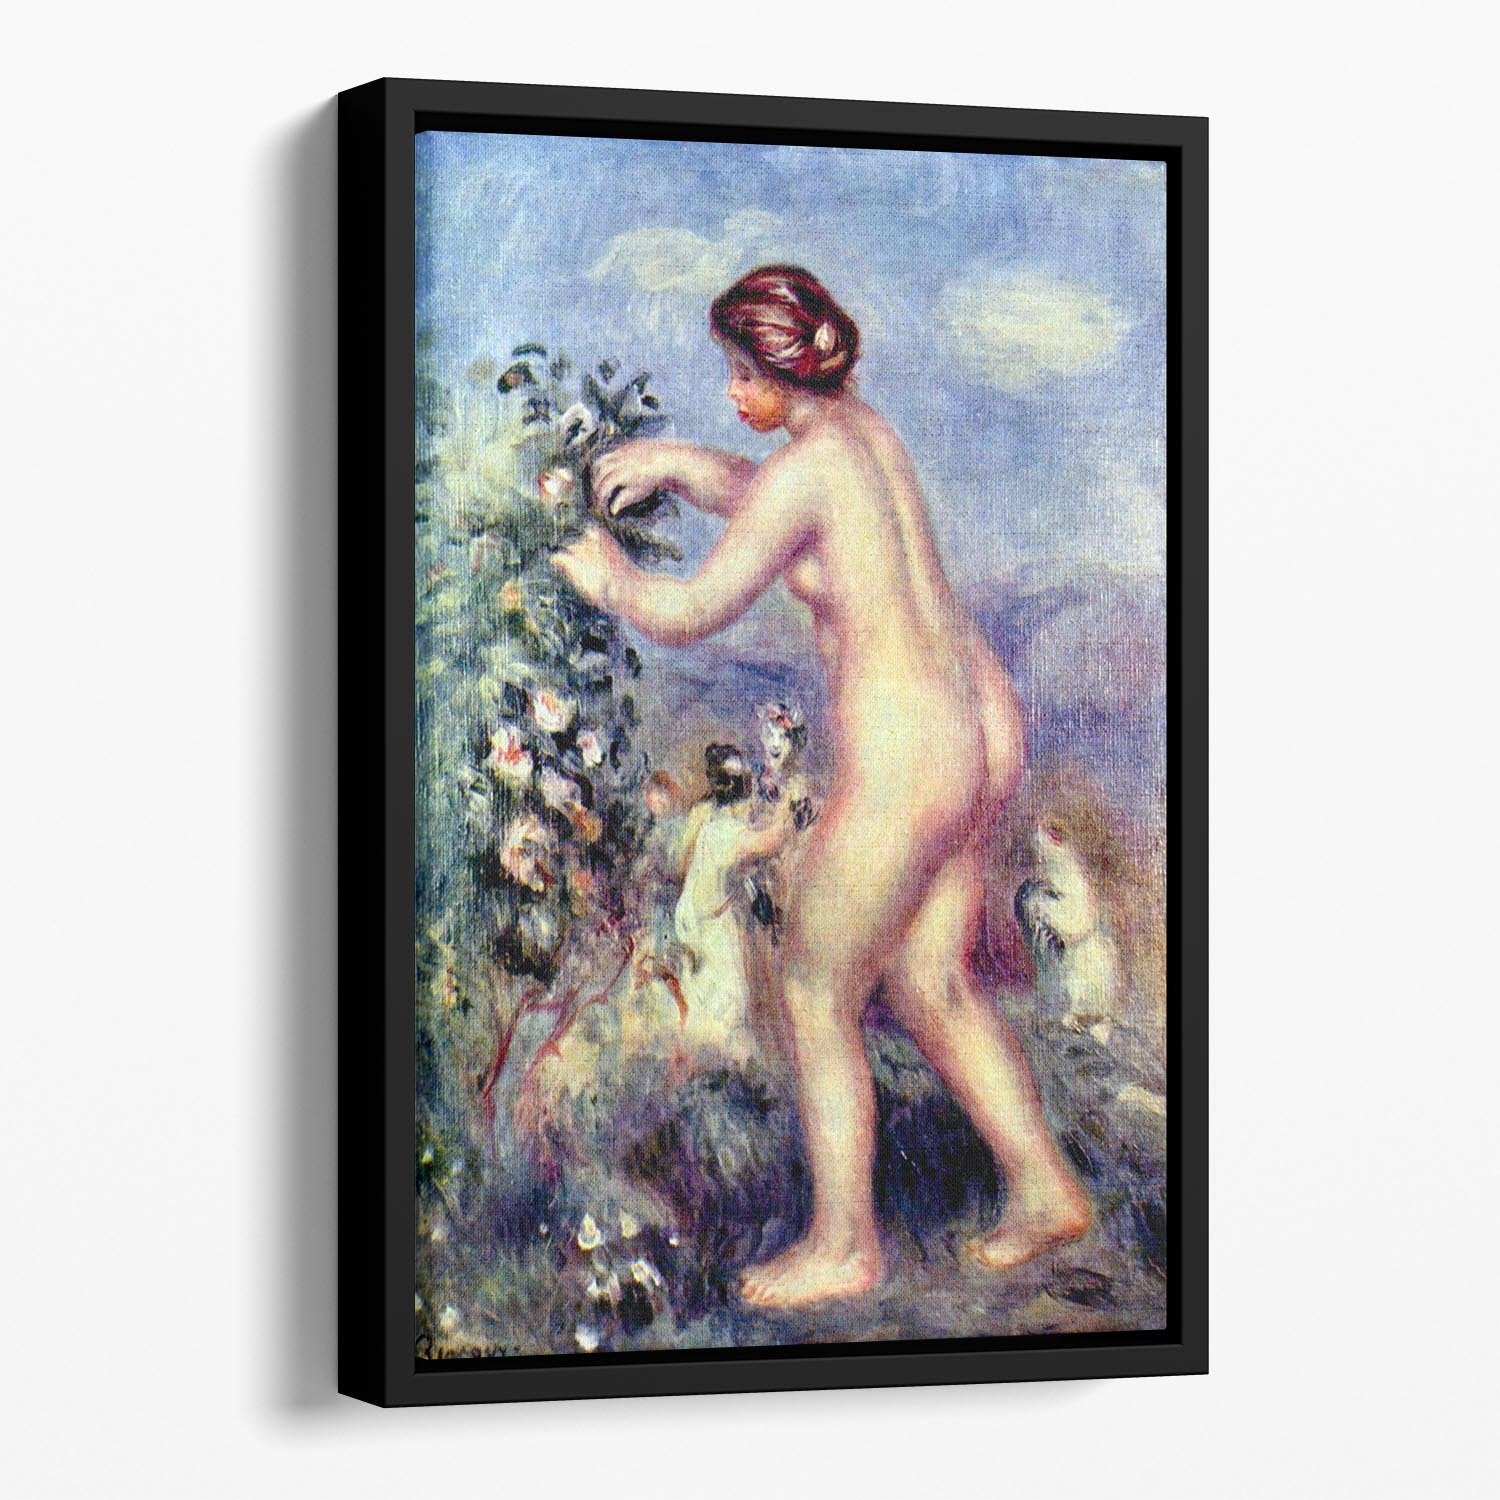 Ode to flower after Anakreon by Renoir Floating Framed Canvas